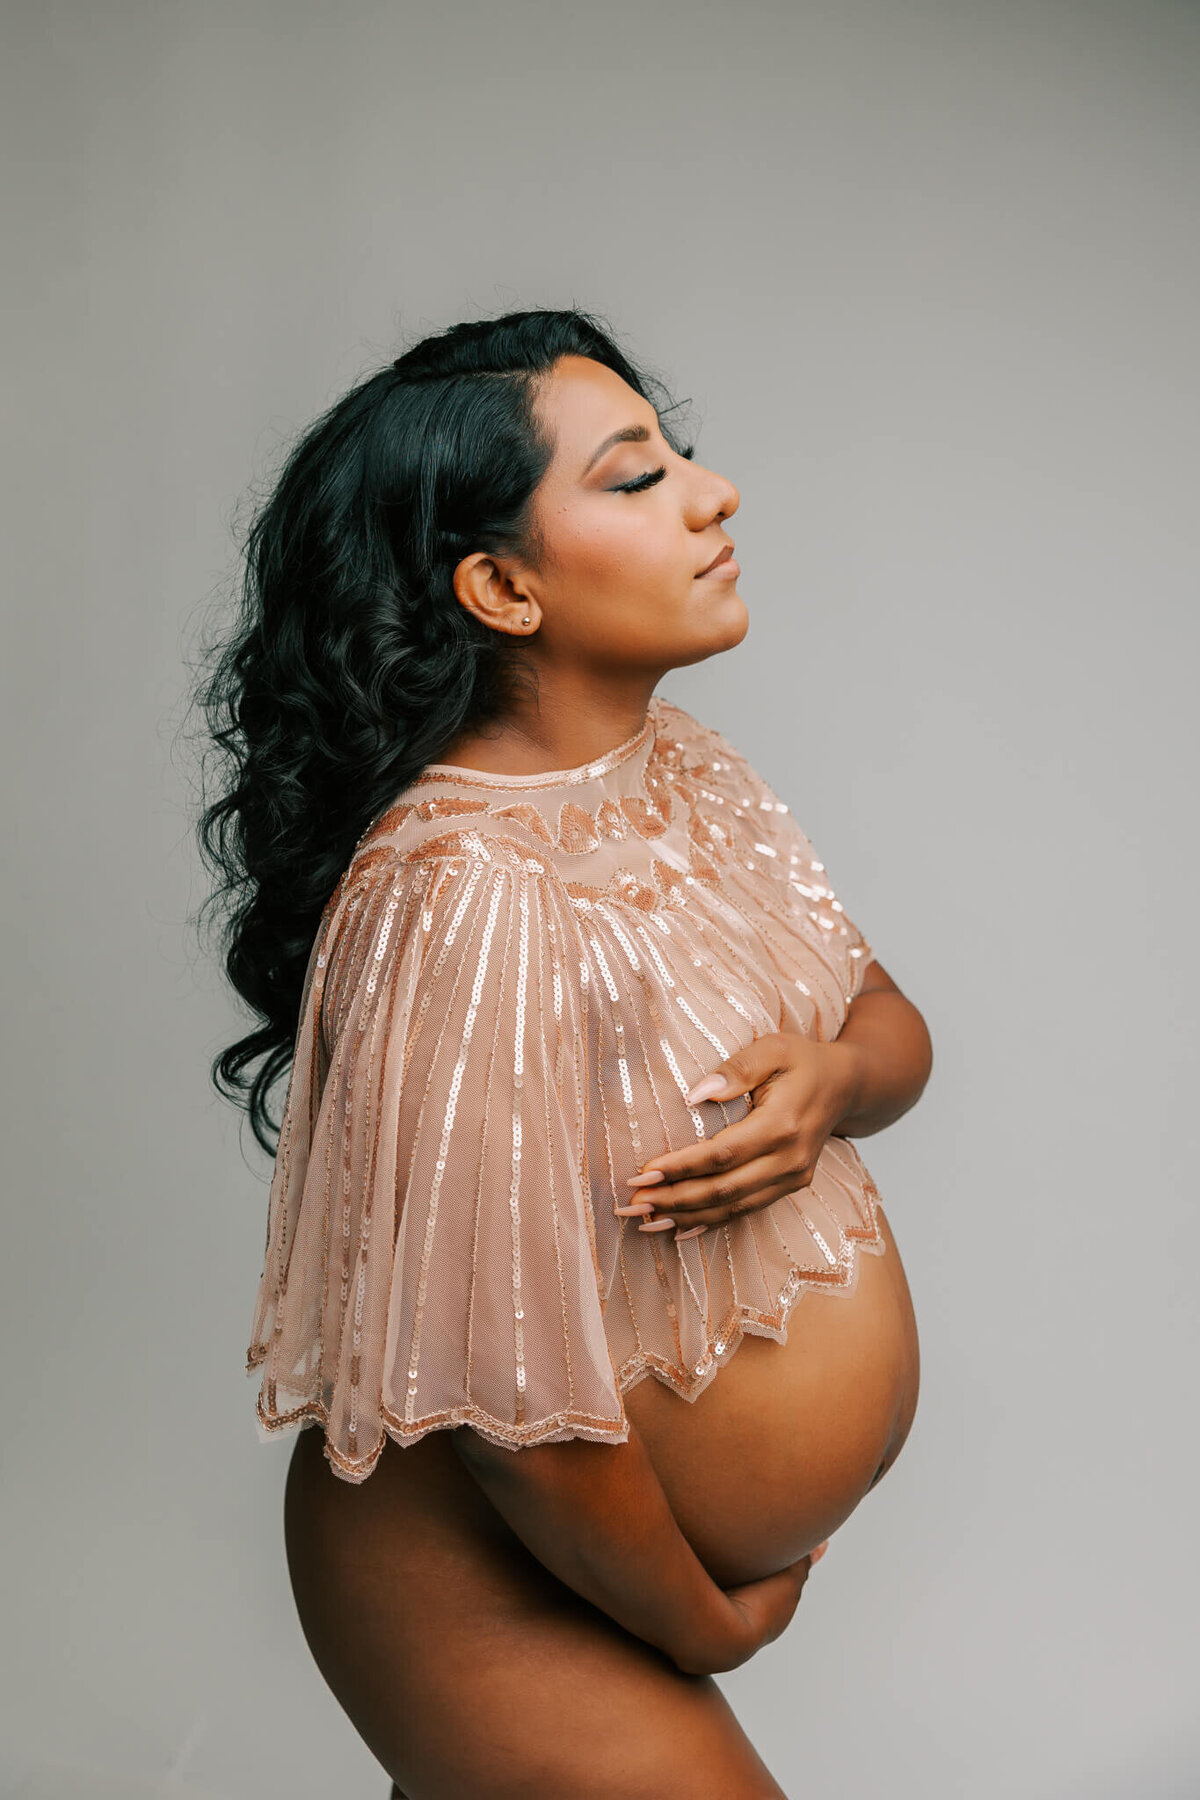 mom wearing gold cape in studio maternity photography portrait